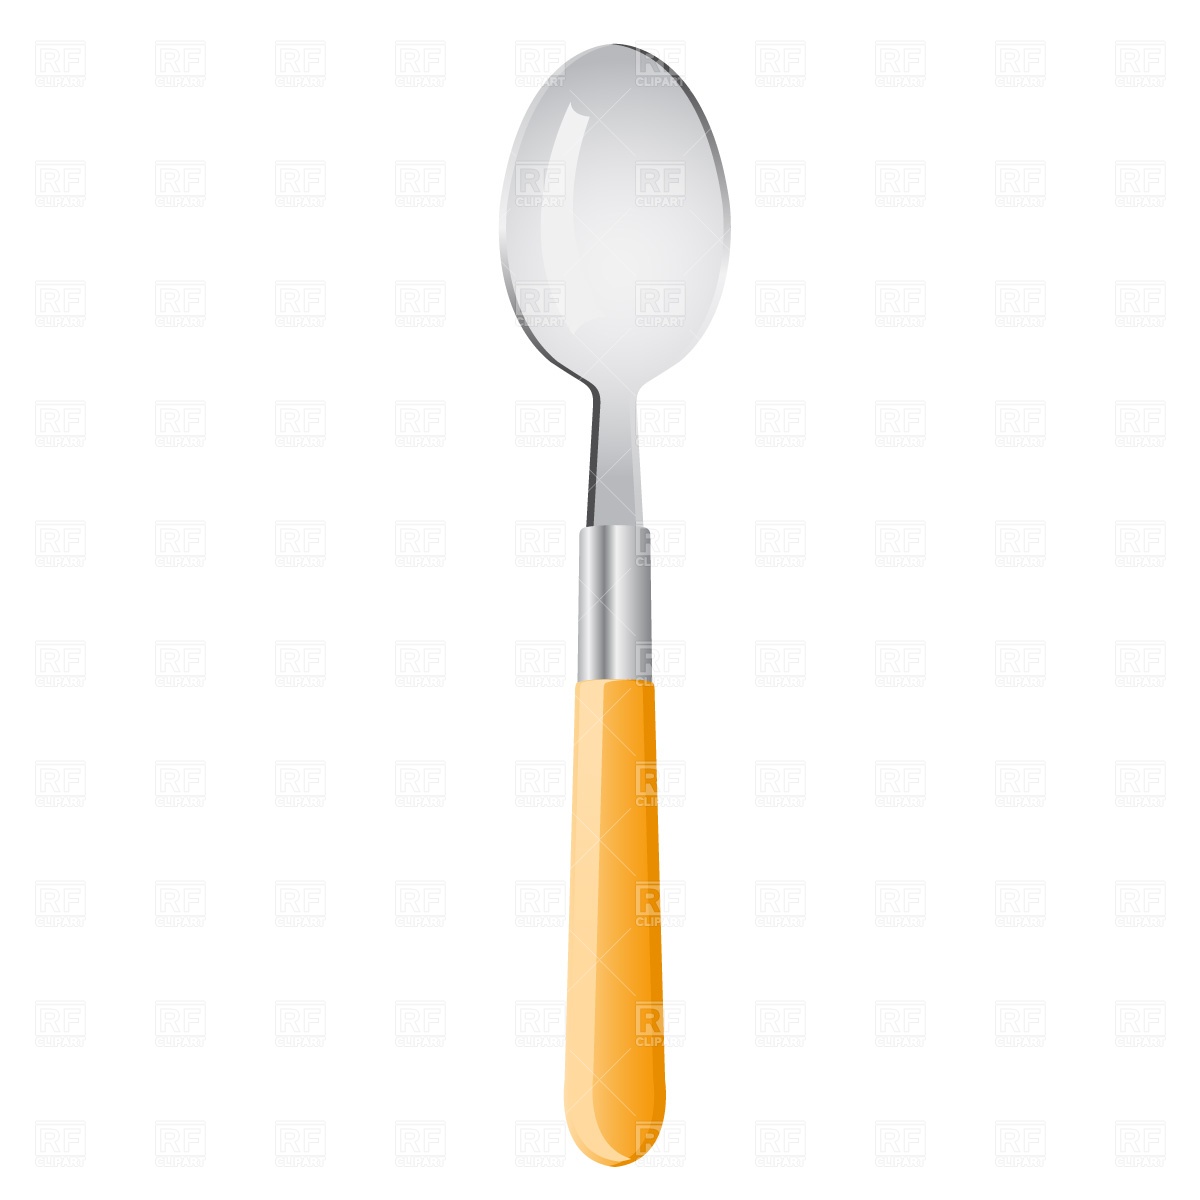 Clipart Catalog Objects Dessert Spoon Download Free Vector Clipart